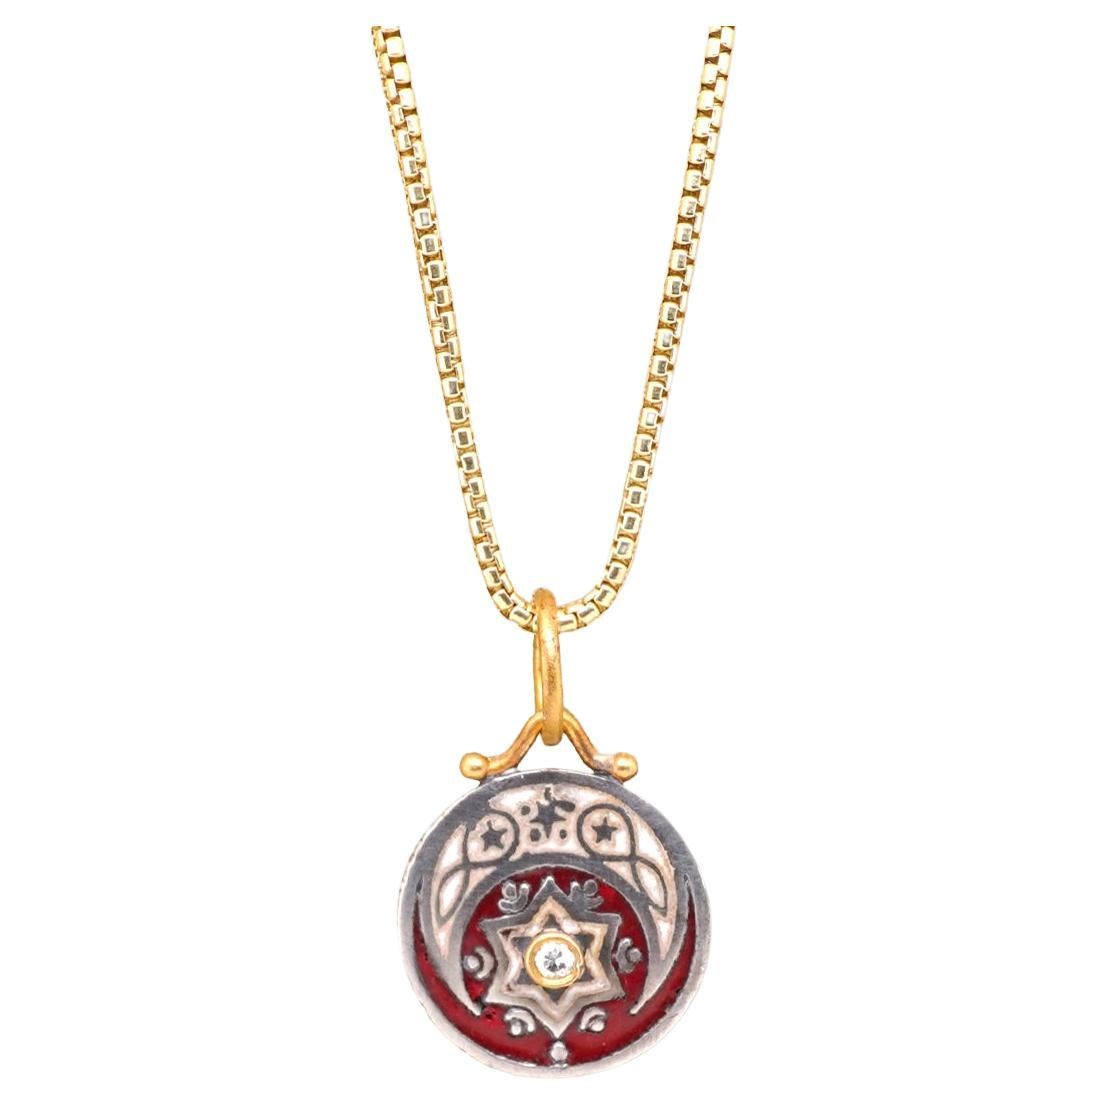 Moon and Star Enameled Pendant Charm in Red and Silver, Pendant Necklace with Diamond, 24kt Gold and Silver by Prehistoric Works of Istanbul, Turkey. Diamond - 0.03cts. Comes with 16